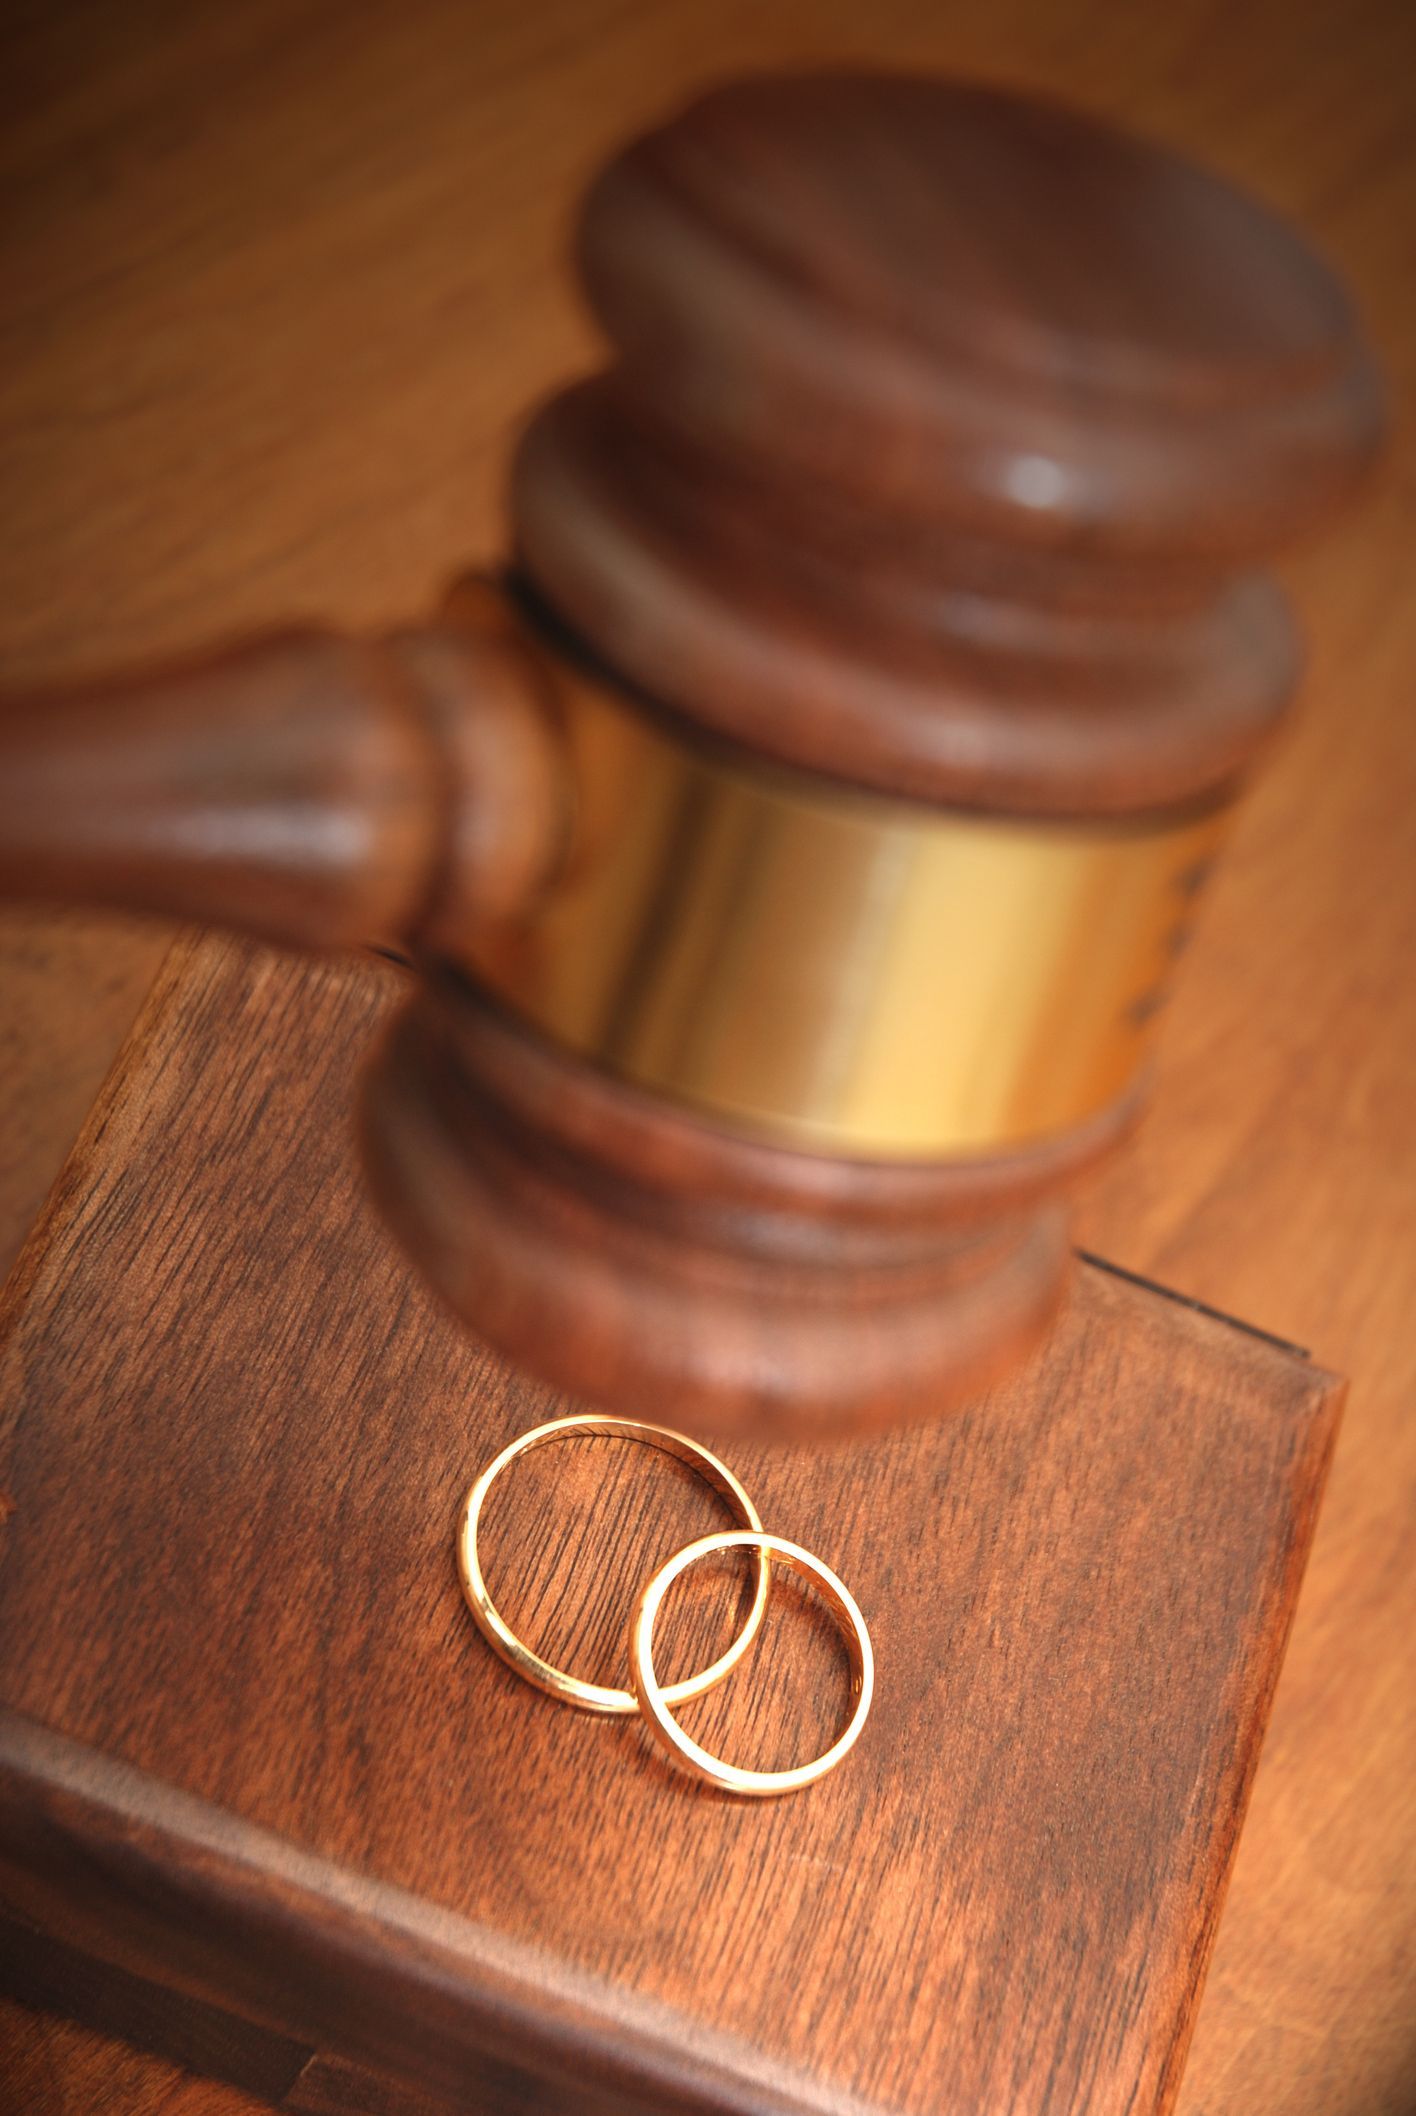 A Pair of Wedding Rings Sitting on Top of a Wooden Gavel | Sydney, NSW | Online Divorce Australia